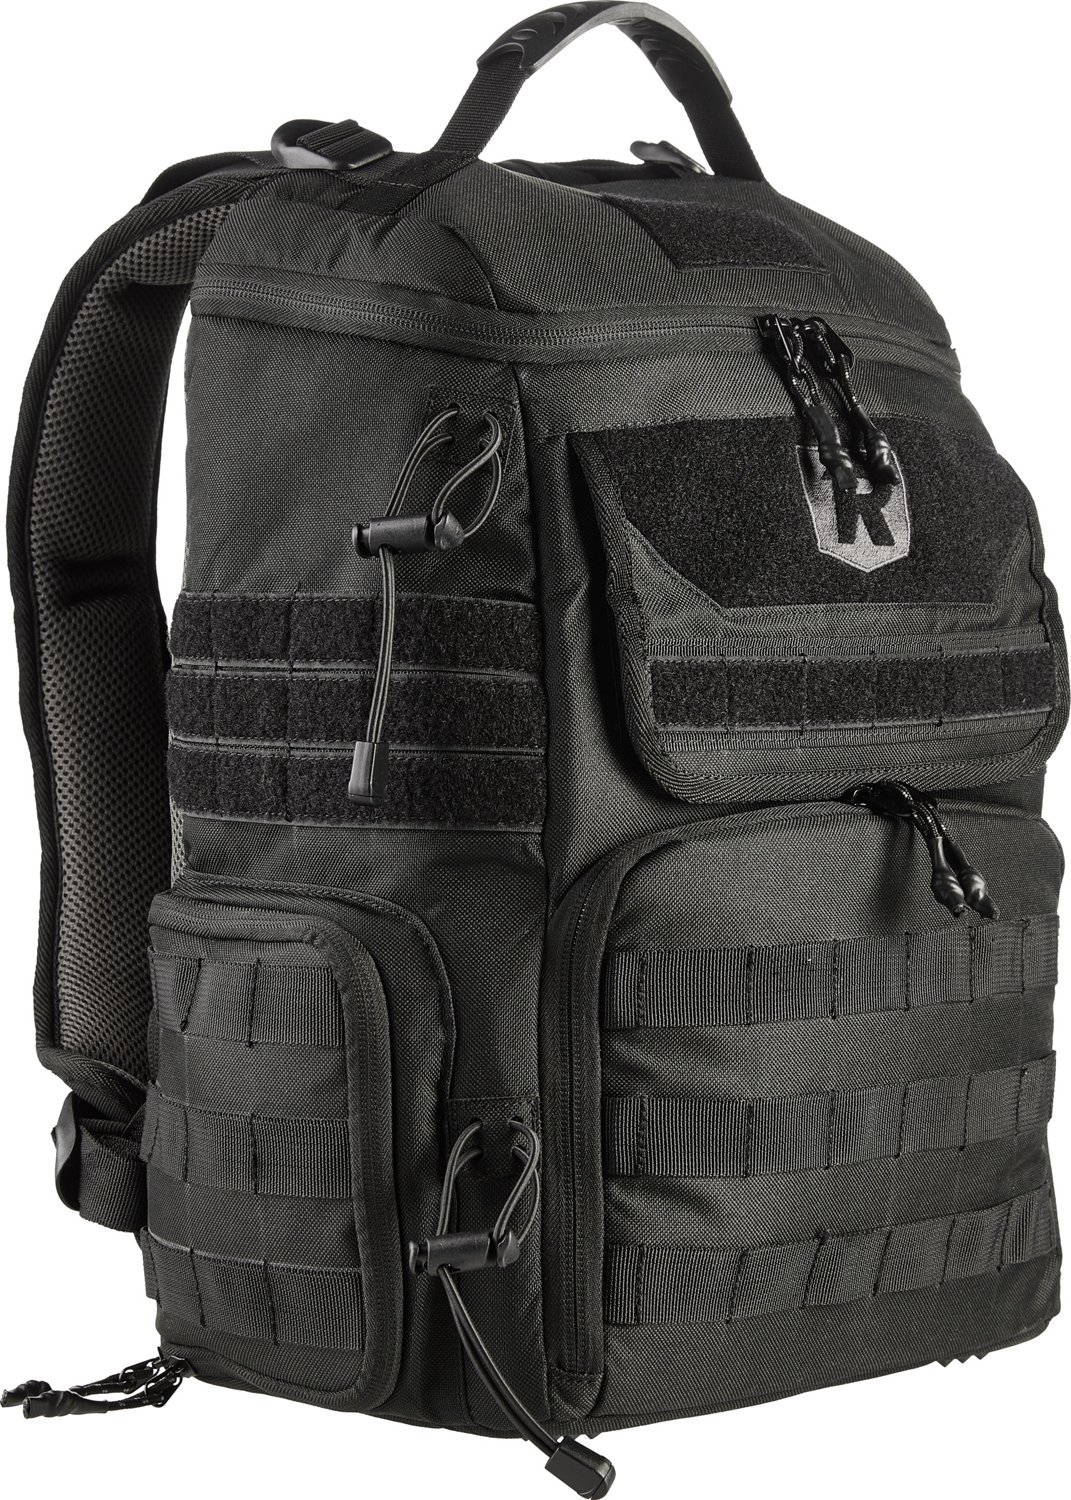 Redfield Range Backpack  Free Shipping at Academy